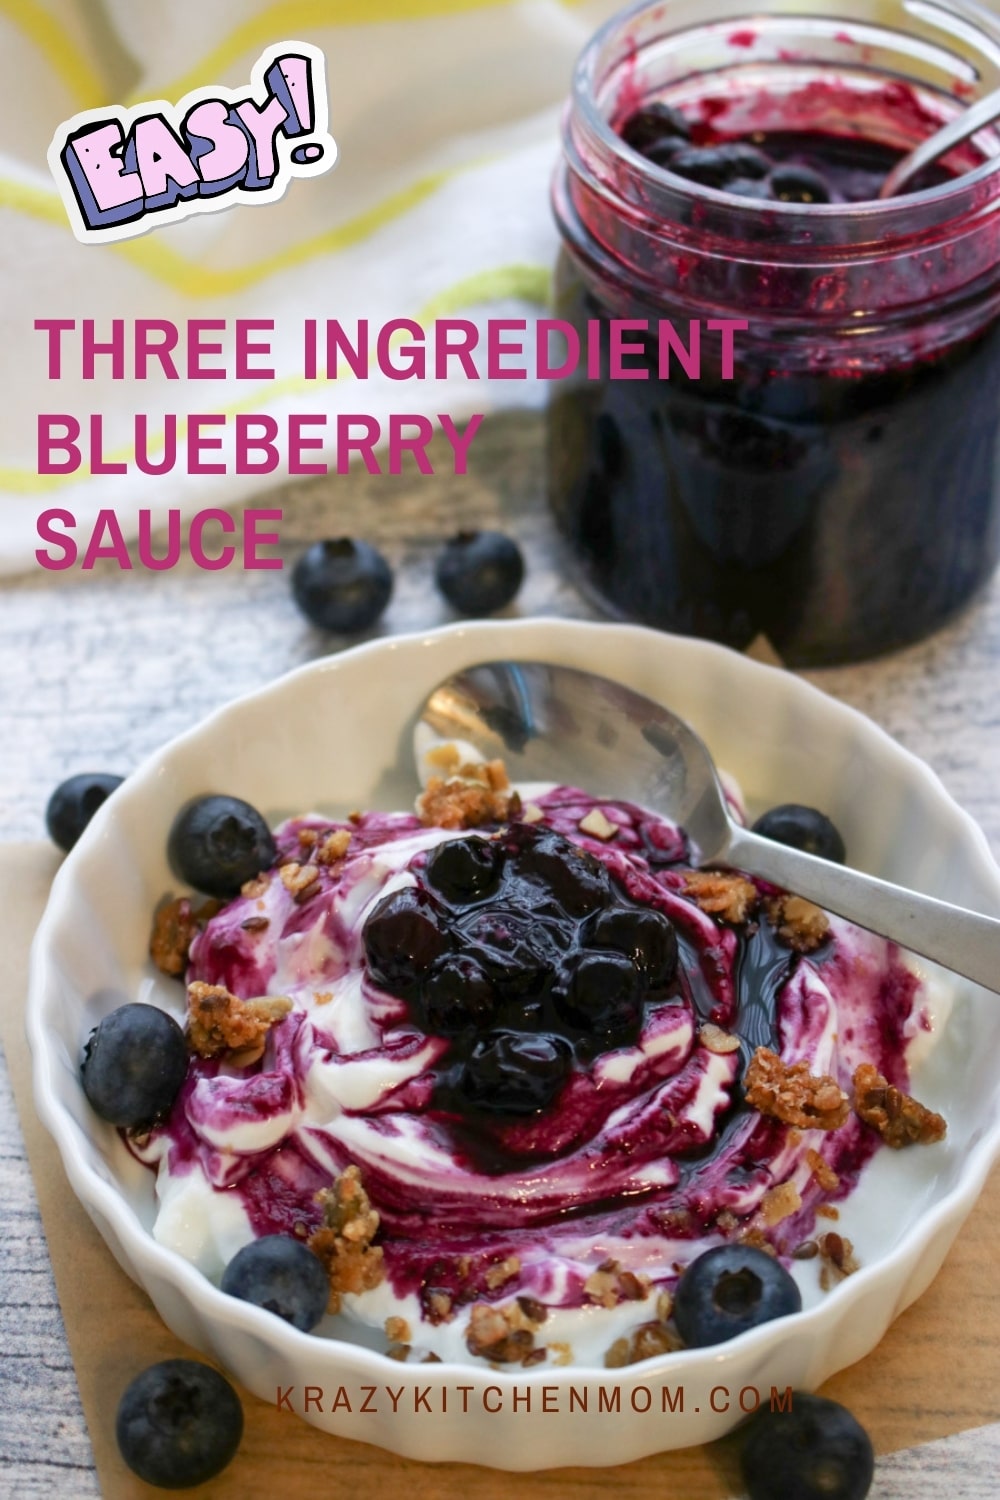 Sweet, juicy, tangy blueberries cooked down to make your new favorite sauce. Pour it over pancakes, waffles, yogurt, or ice cream. via @krazykitchenmom